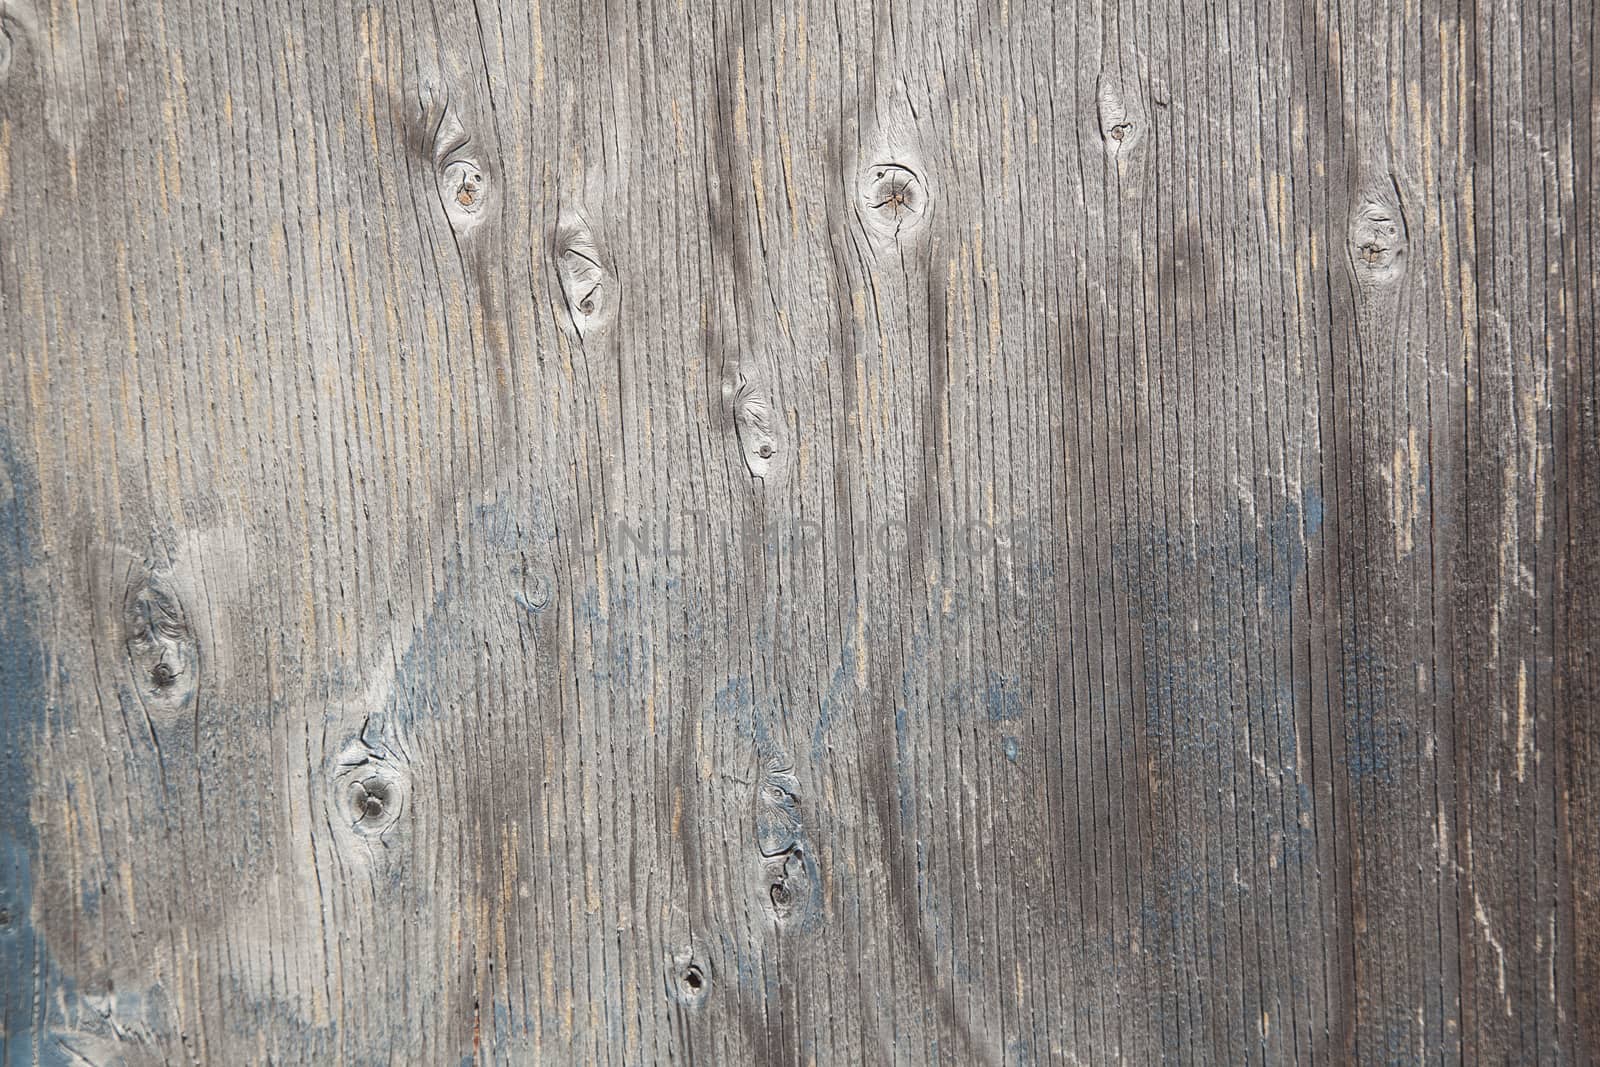 grey wood with knots and remnants of blue paint